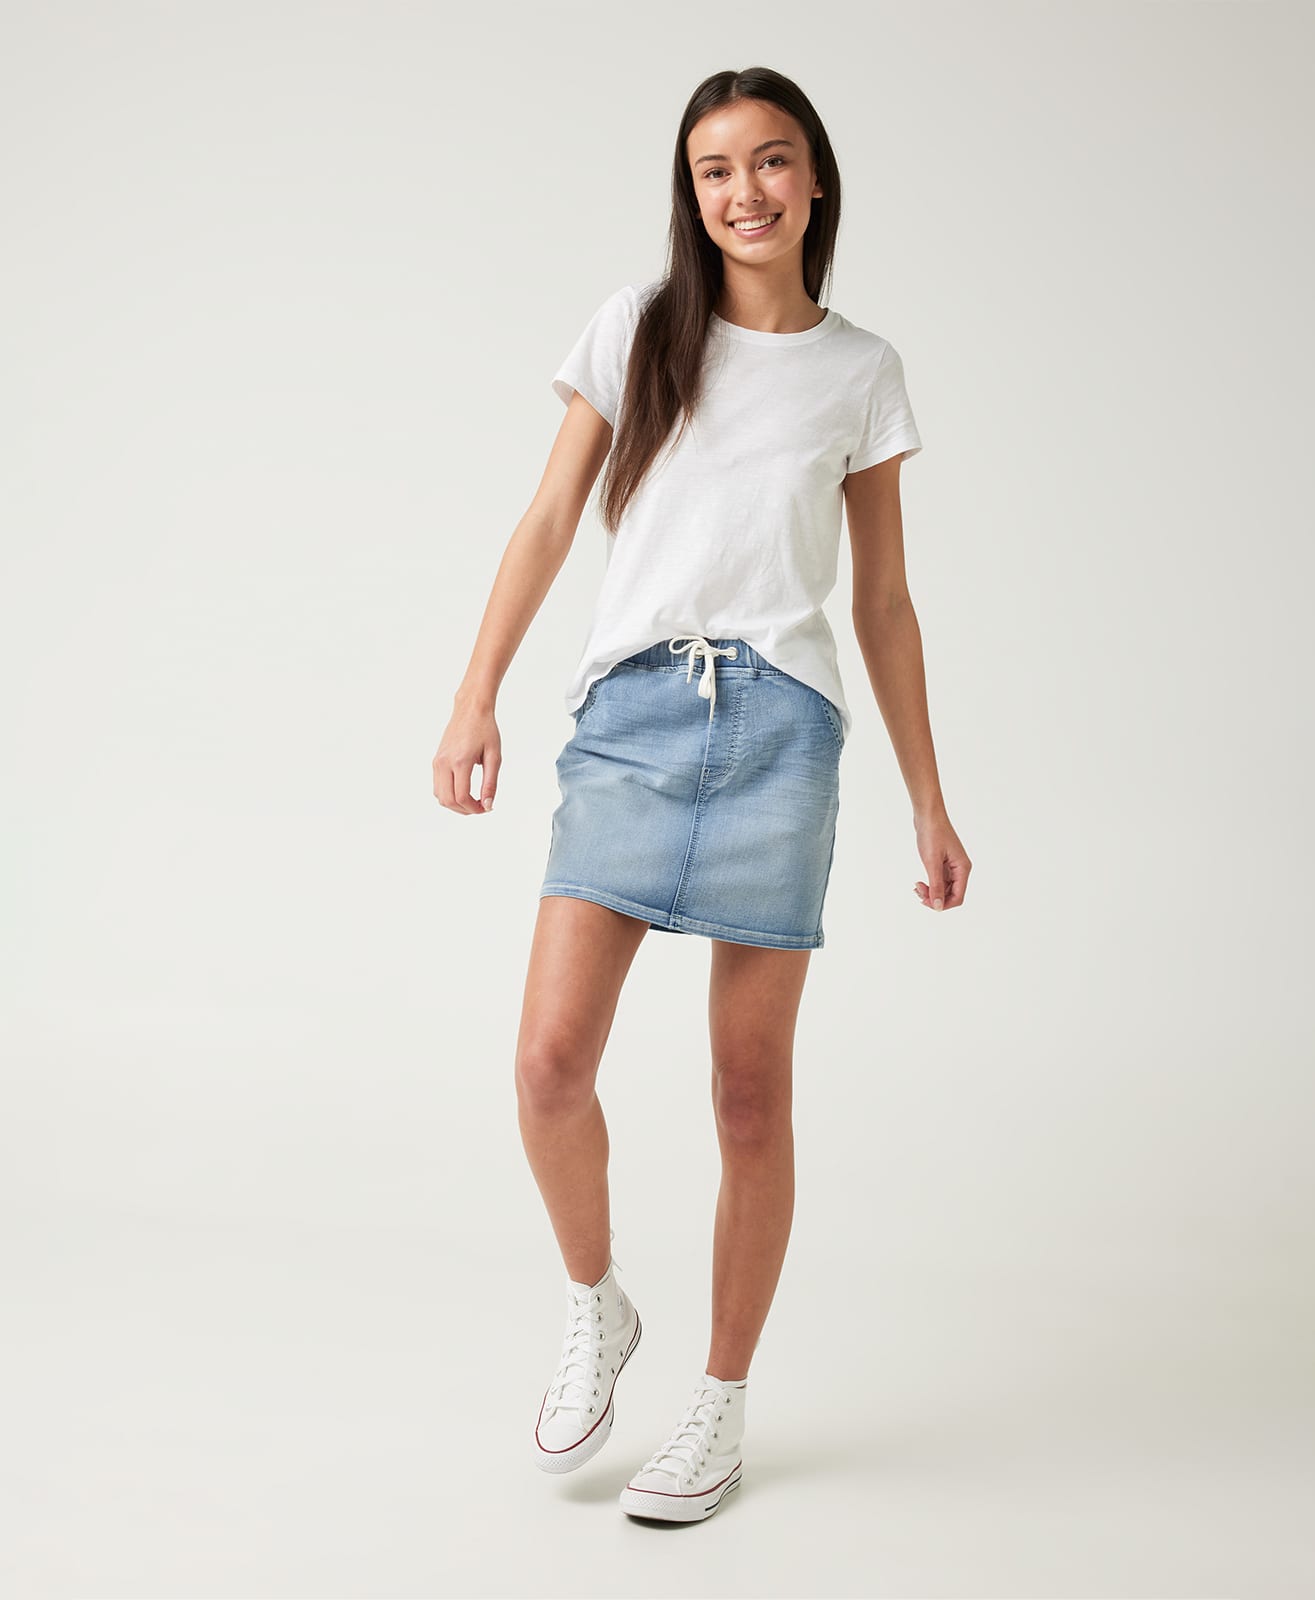 Kids - Score Some New Kids Clothes | Just Jeans™ Online